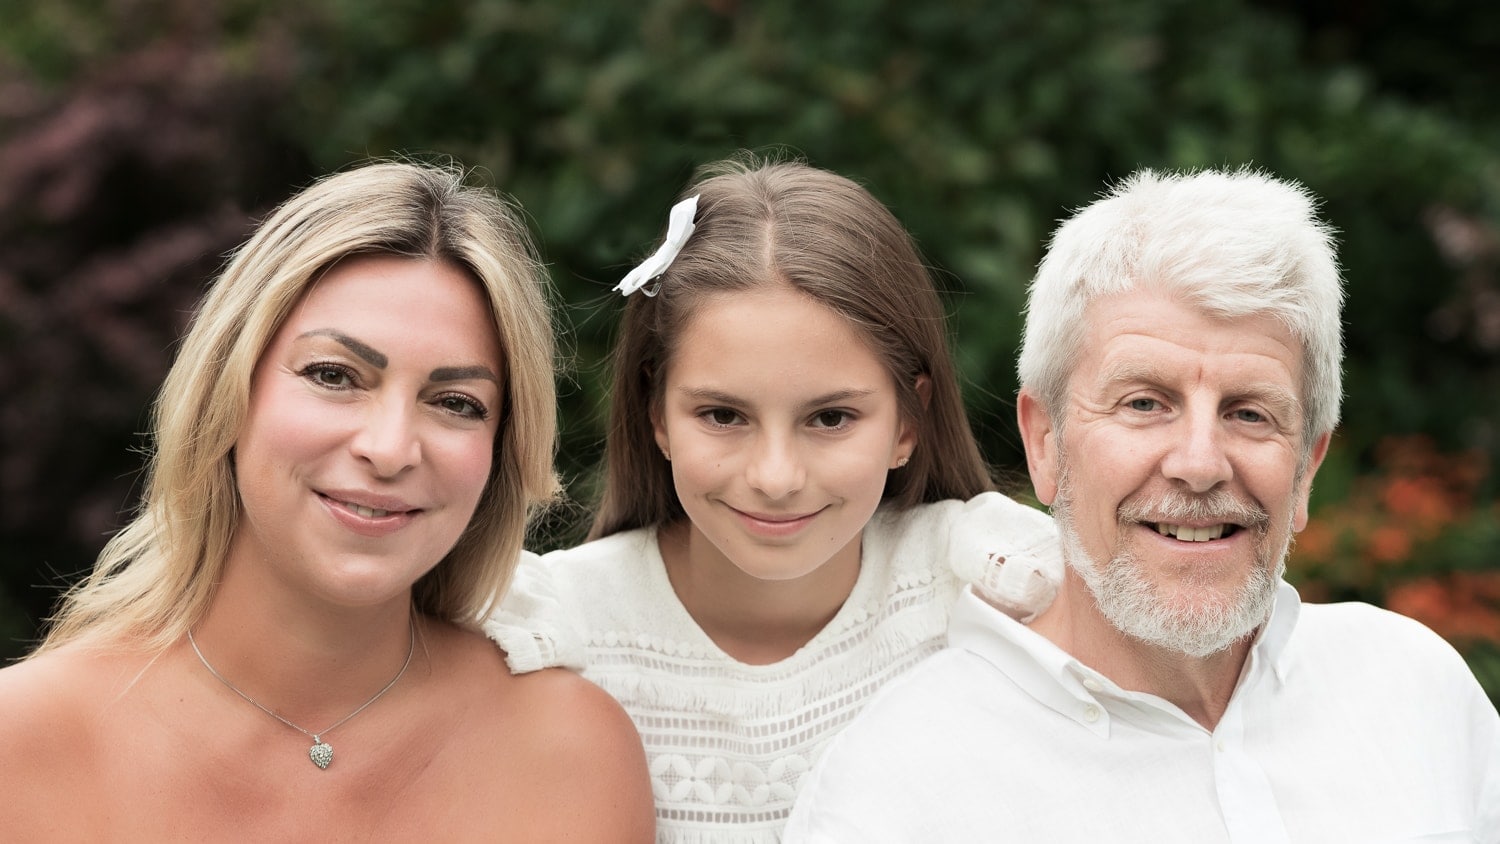 Nic Bisseker Photographer Family Photographer East Grinstead